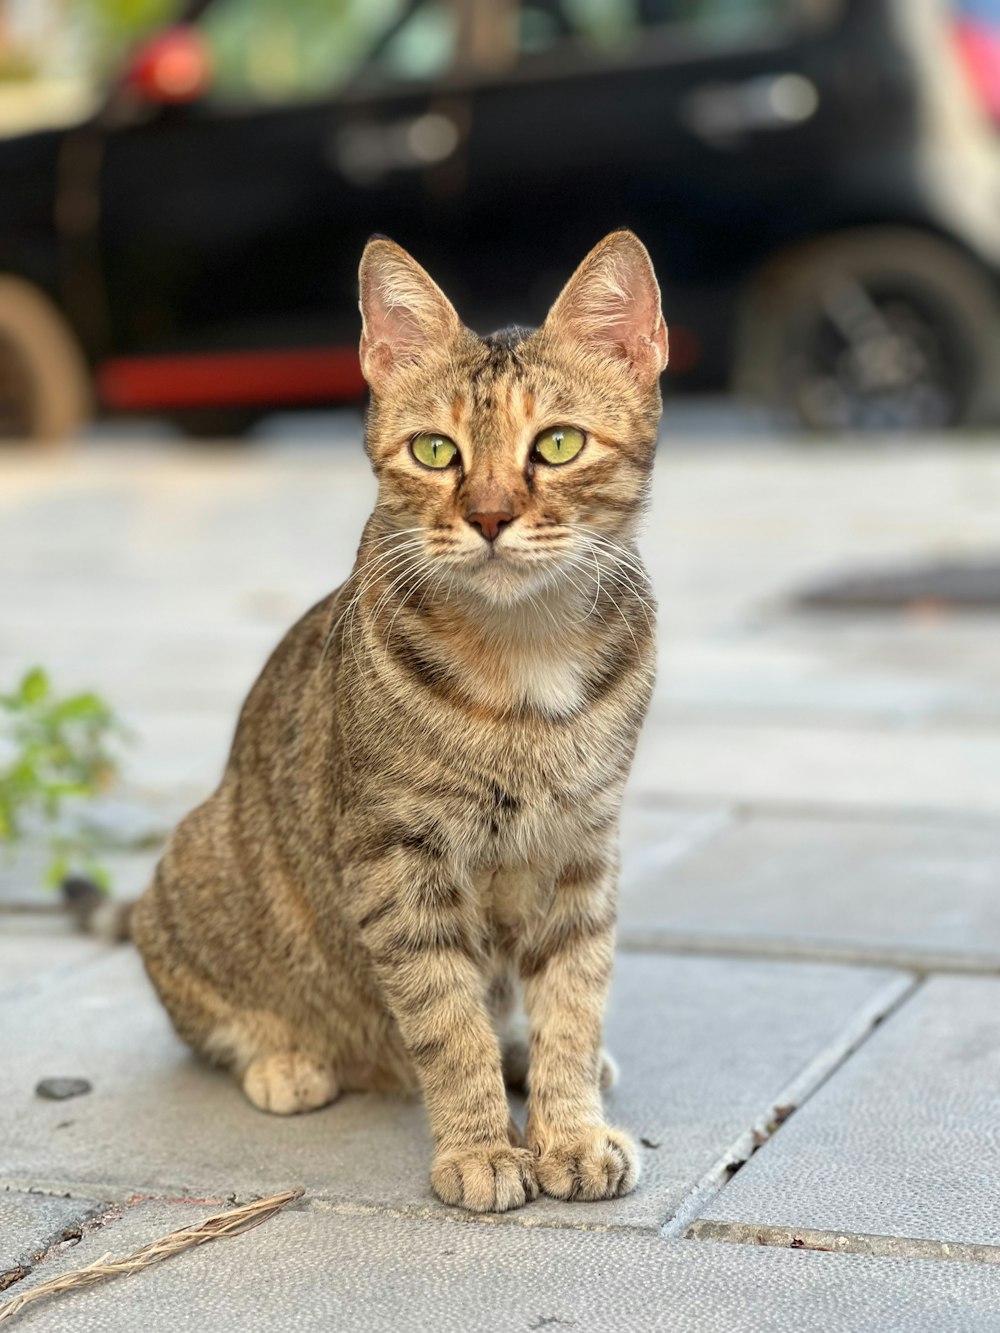 a cat sitting on a sidewalk looking at the camera